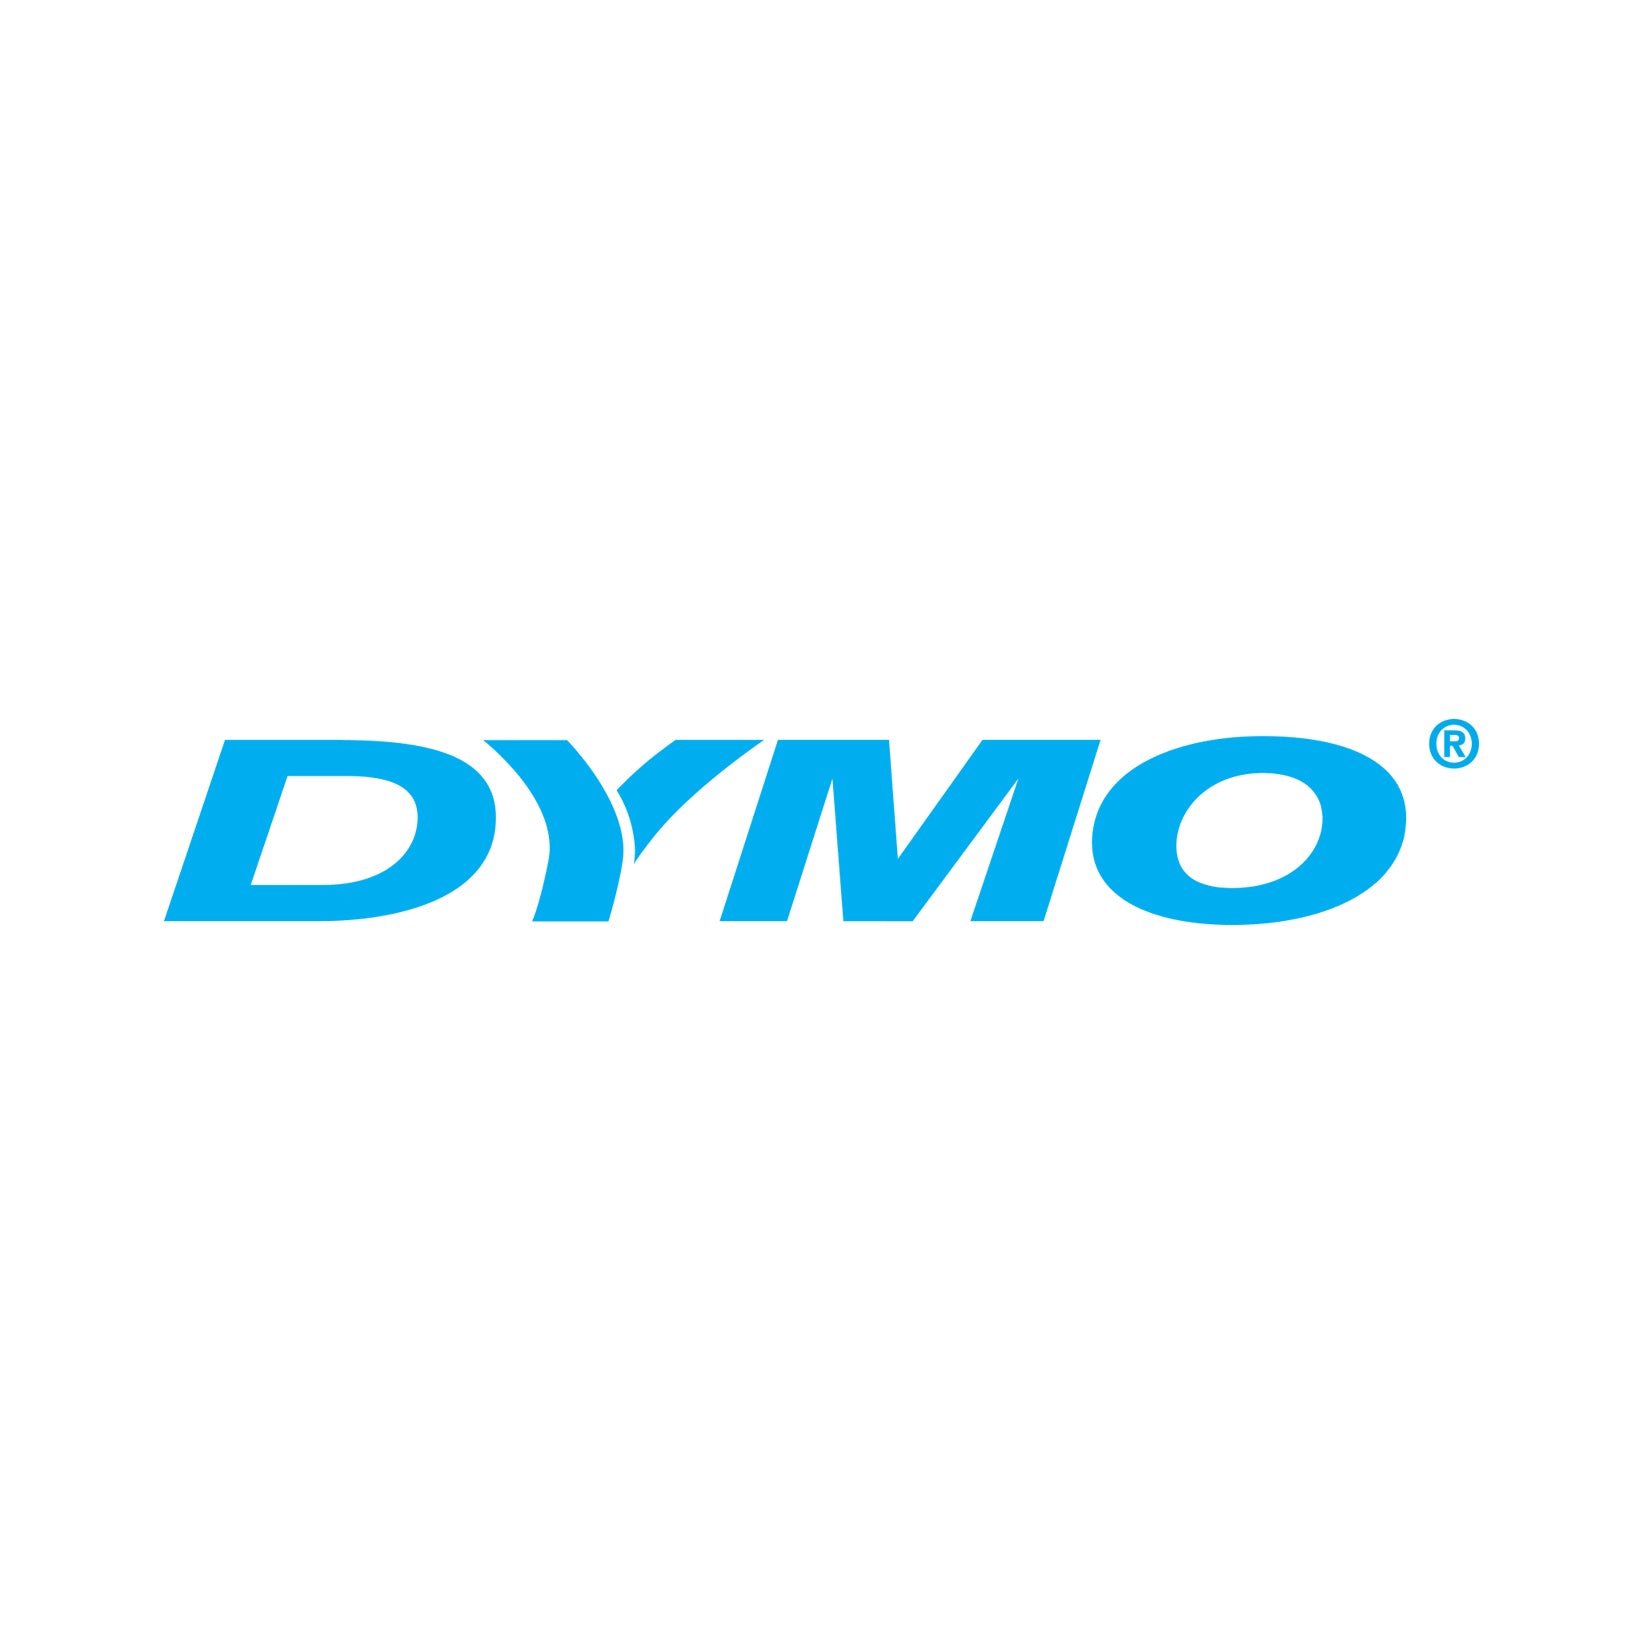 Dymo LV-30346 Compatible Library Labels - 1/2 x 1 7/8 - Free